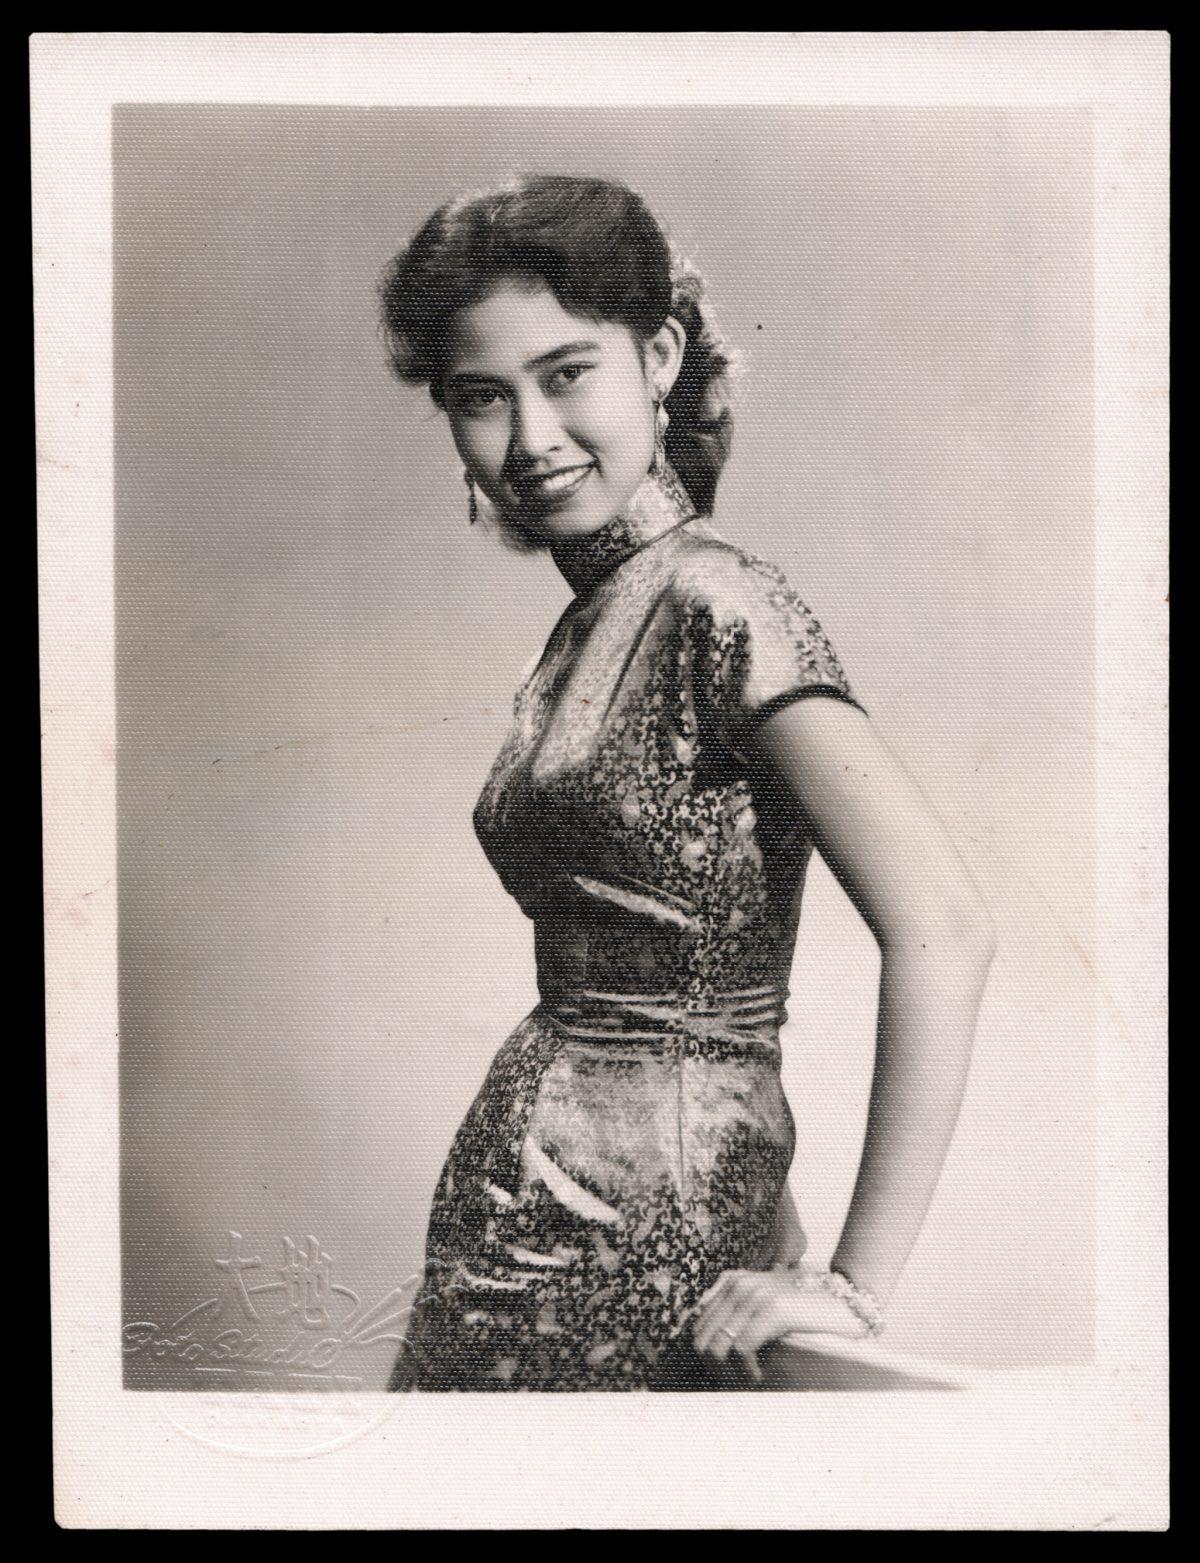 Indonesian actress Aminah Cendrakasih in 1959. Throughout the latter half of the 20th century, the qipao was popularized by celebrities all around the world. Tati Photo Studios, Jakarta. (Public Domain)